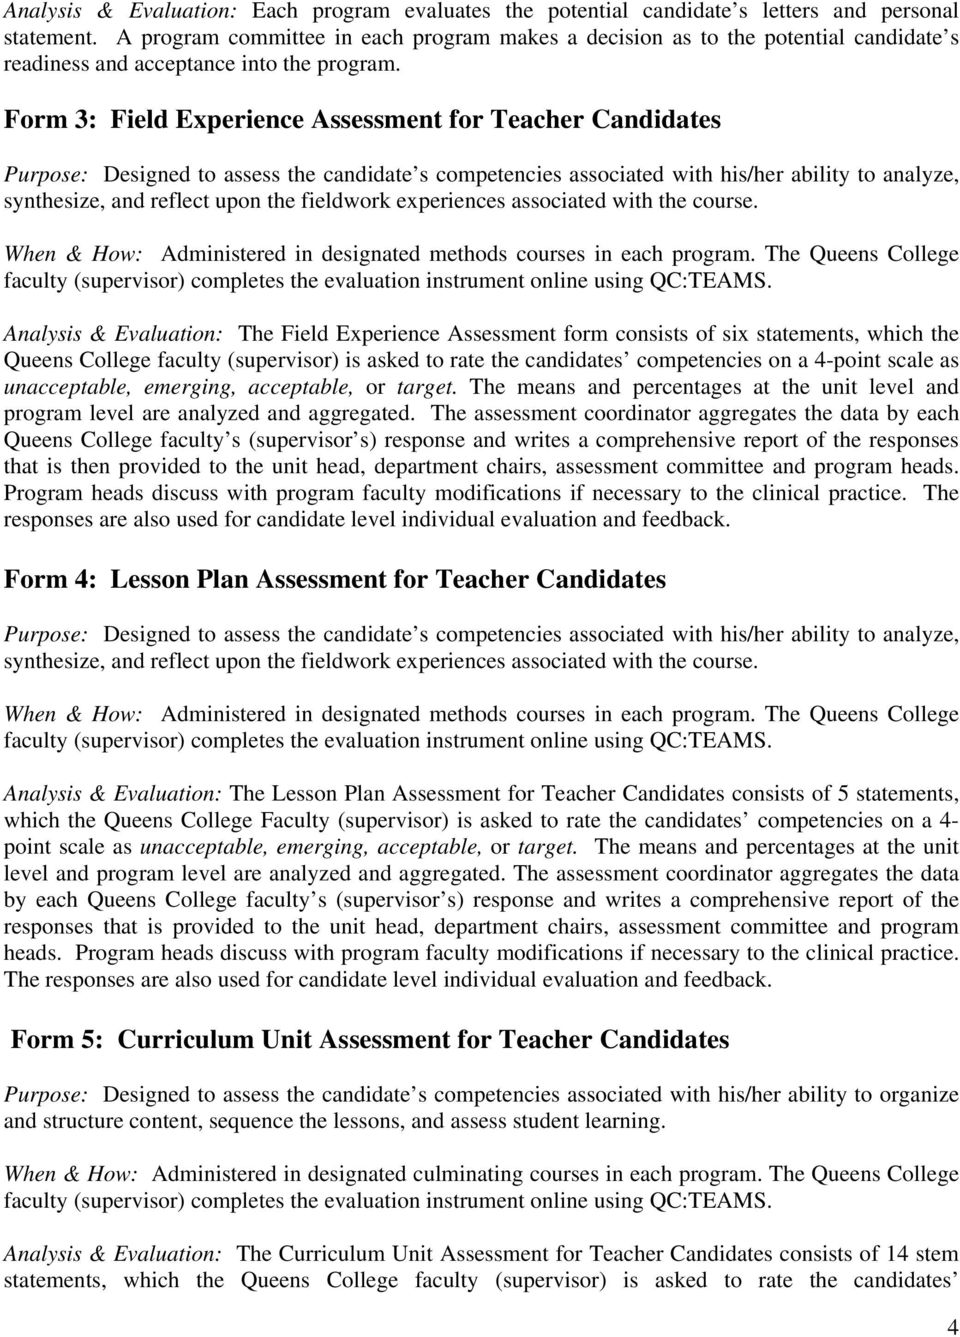 Form 3: Field Experience Assessment for Teacher Candidates Purpose: Designed to assess the candidate s competencies associated with his/her ability to analyze, synthesize, and reflect upon the